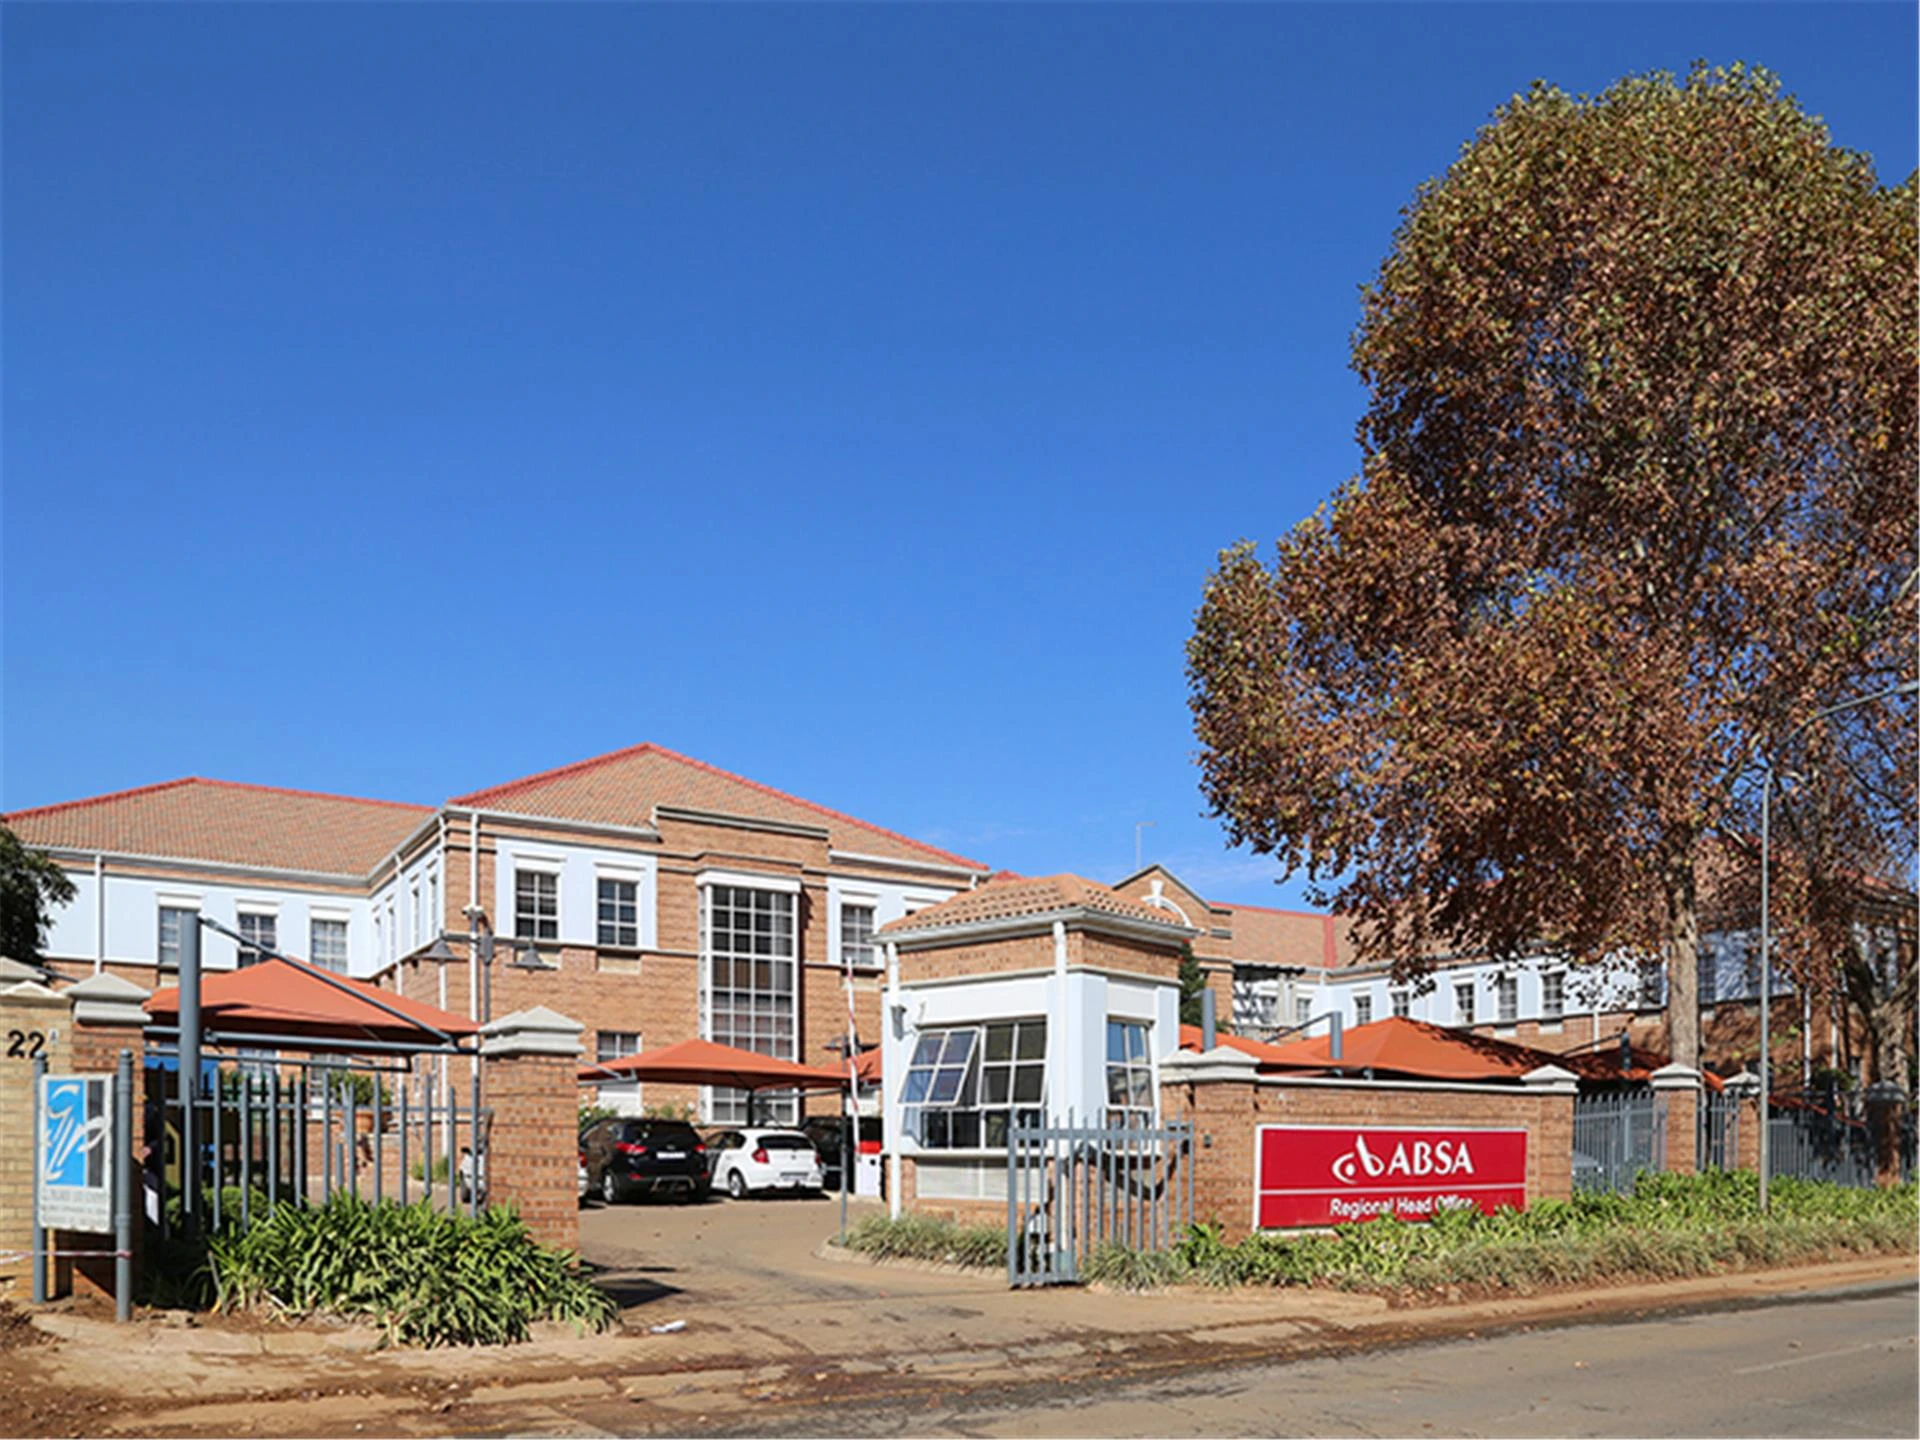 Prime grade office building, occupied by ABSA regional office